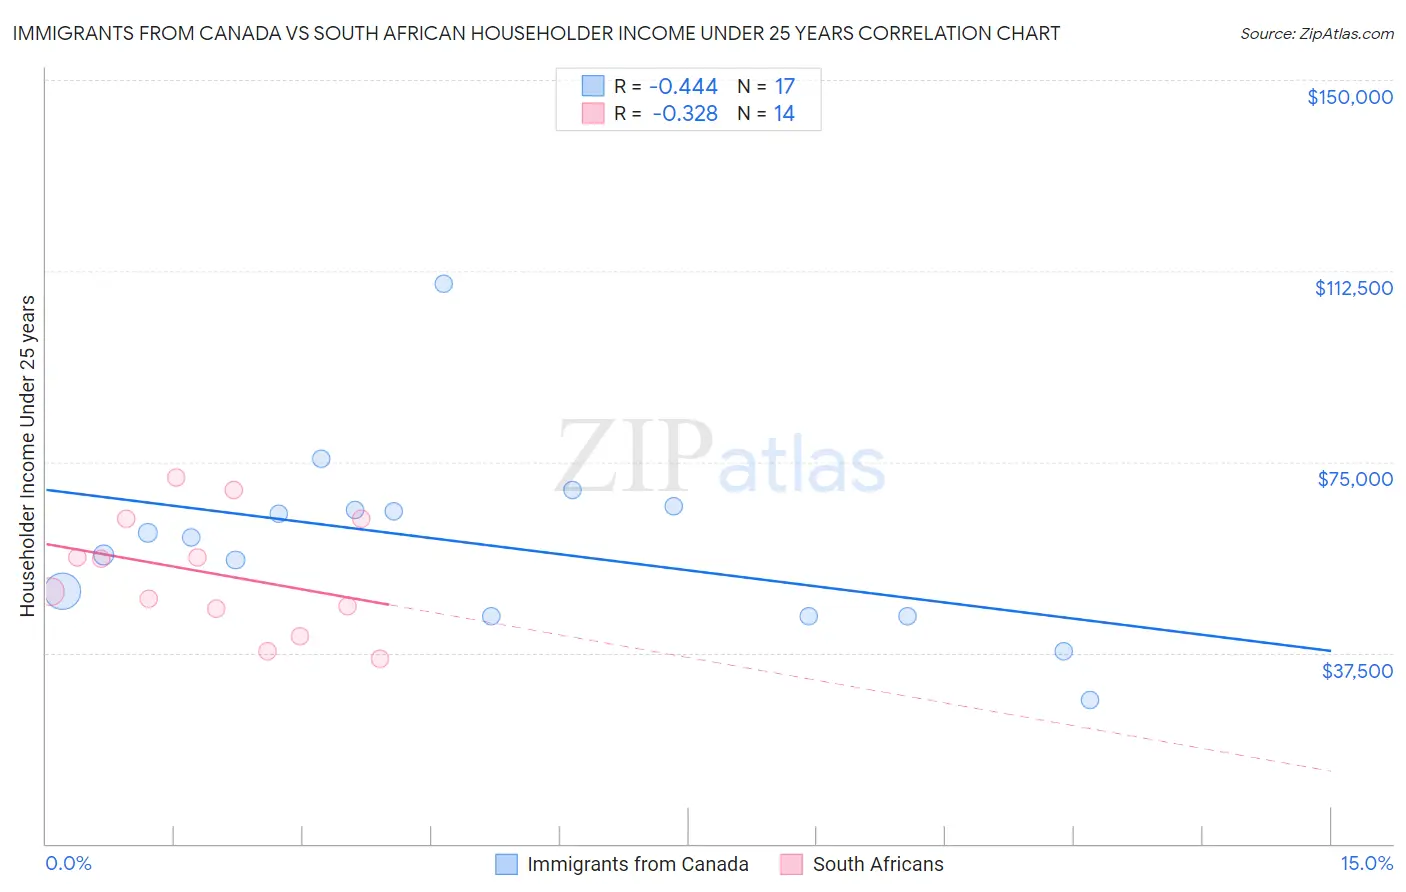 Immigrants from Canada vs South African Householder Income Under 25 years